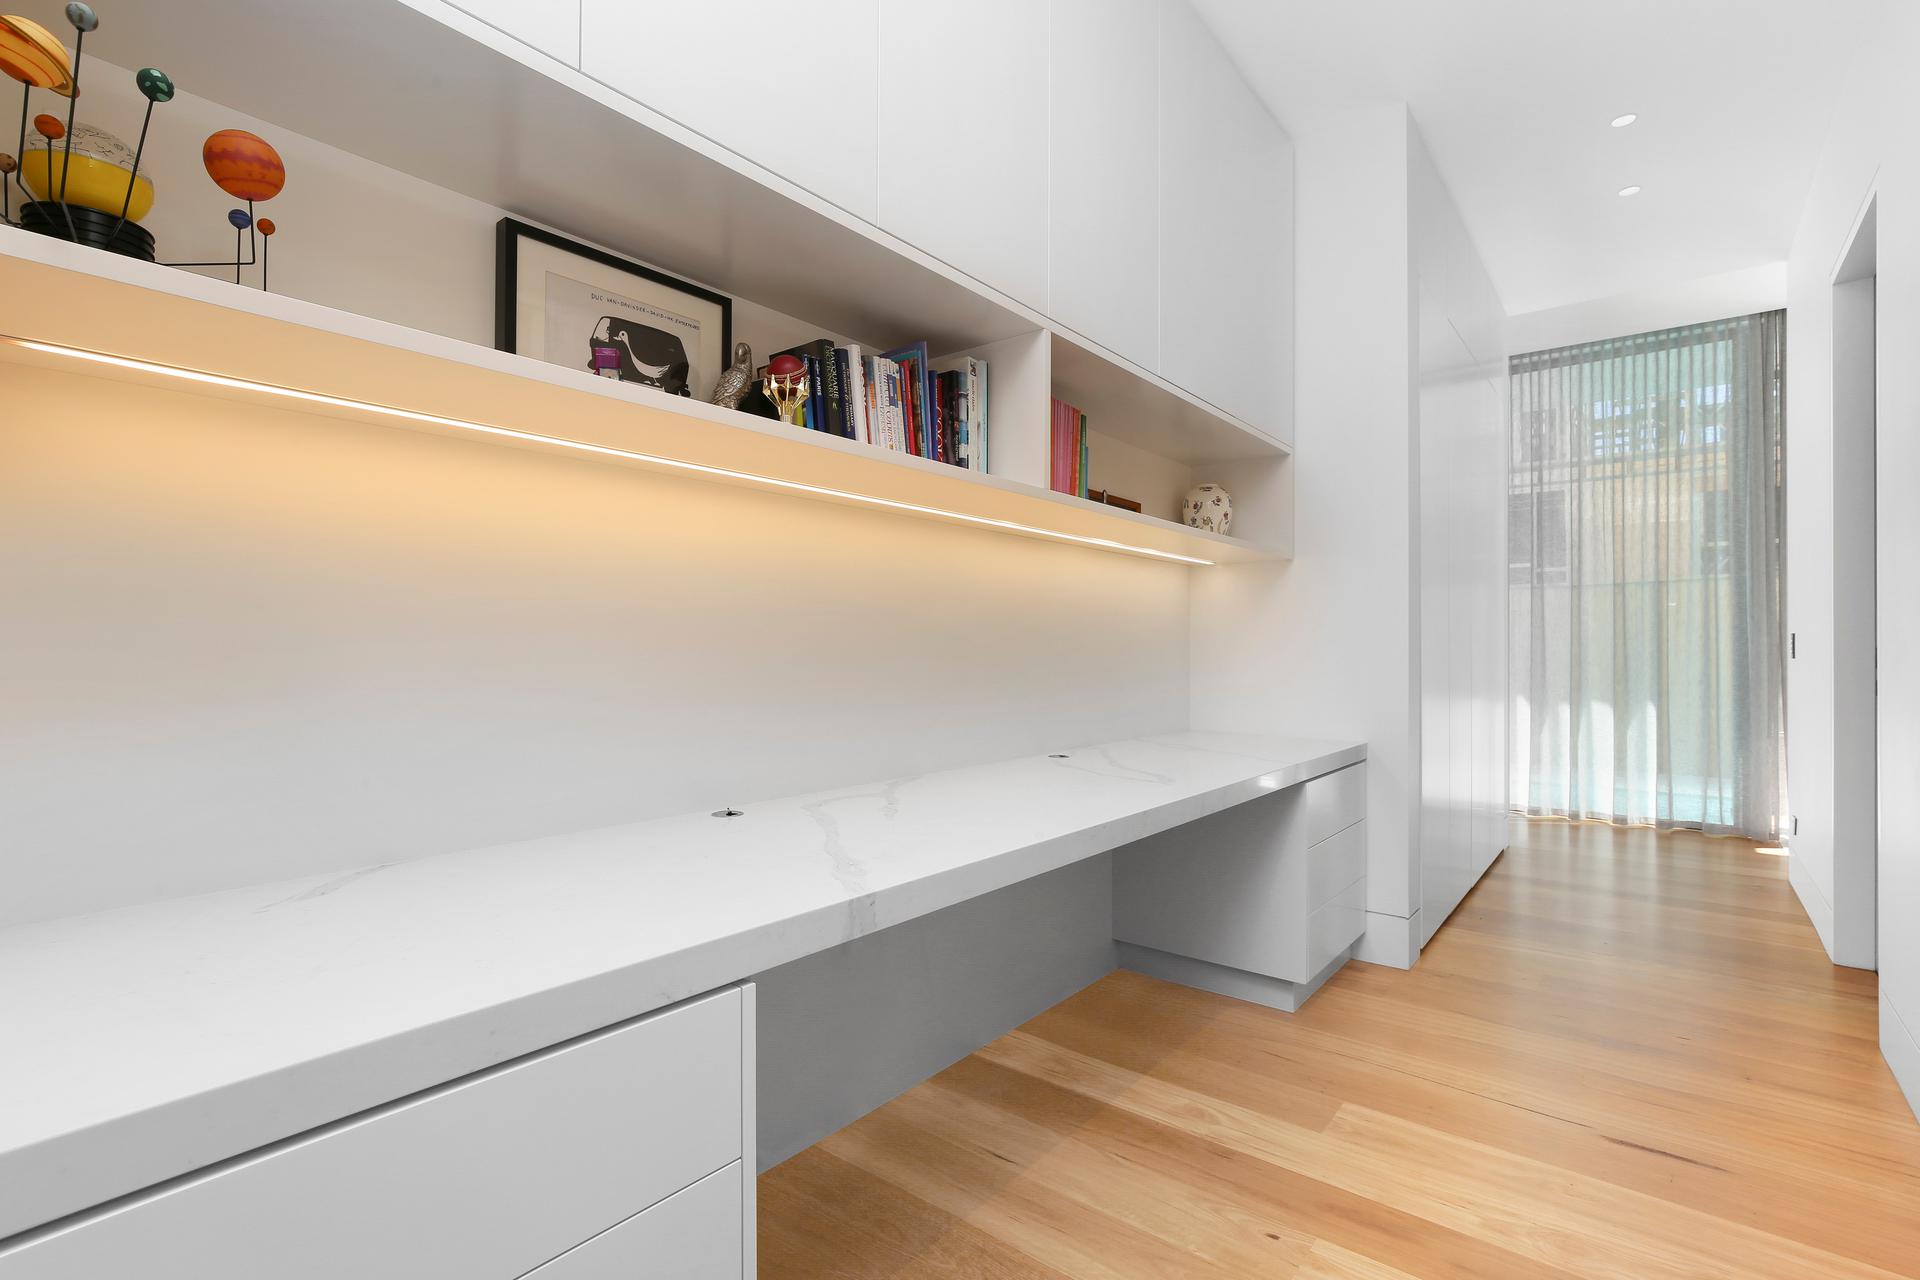 Polyurethane study desk with a stone benchtop and open shelving - Putney, Sydney